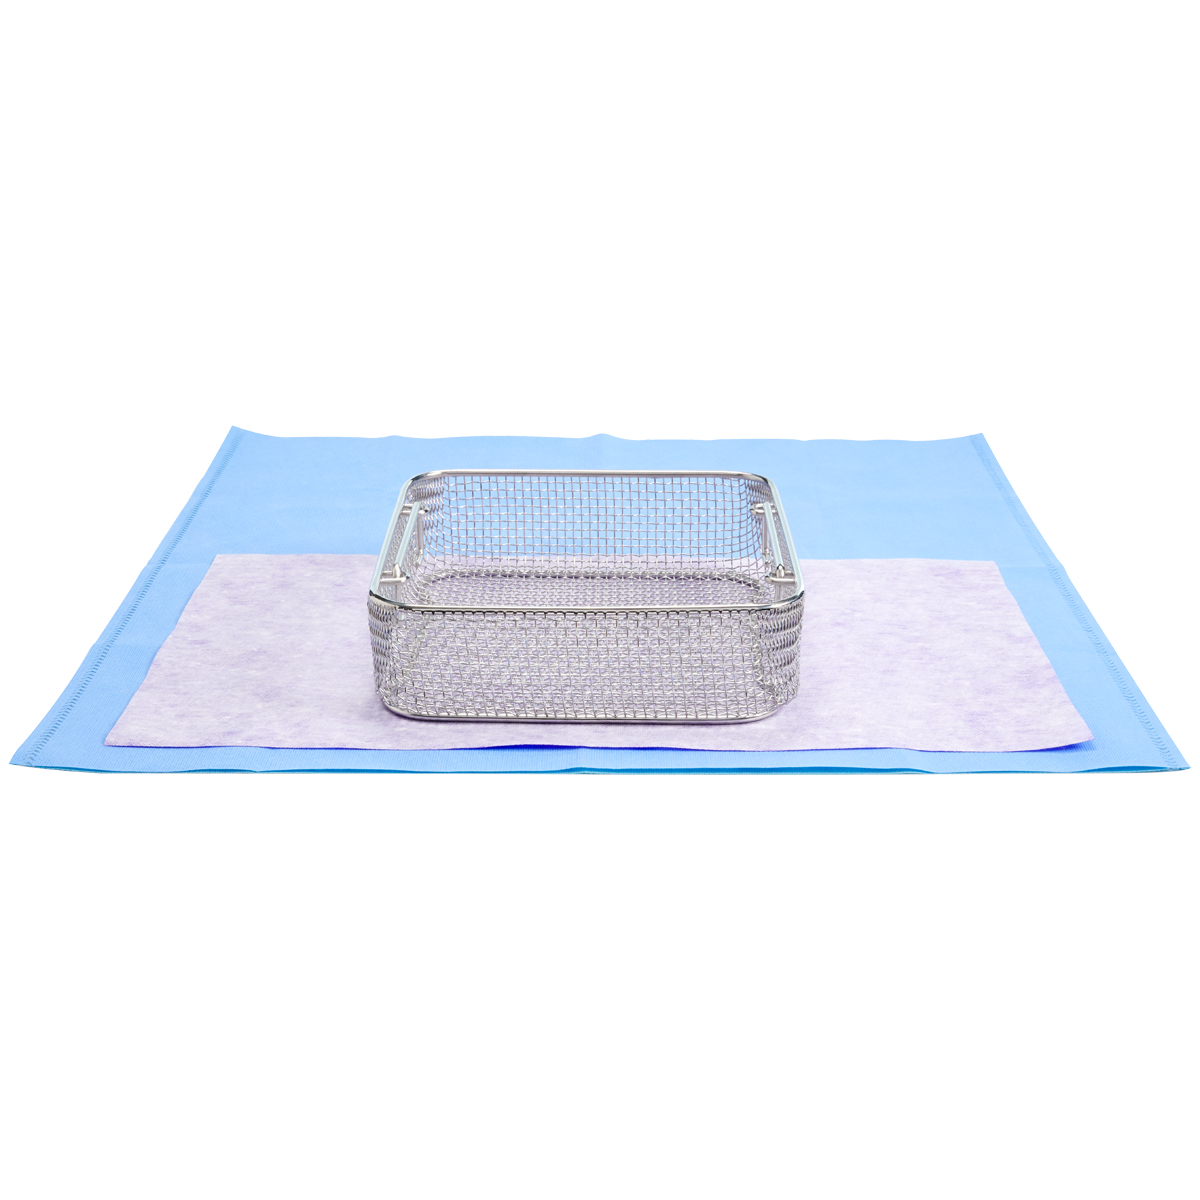 Tray Mat (steam sterilization only) Image